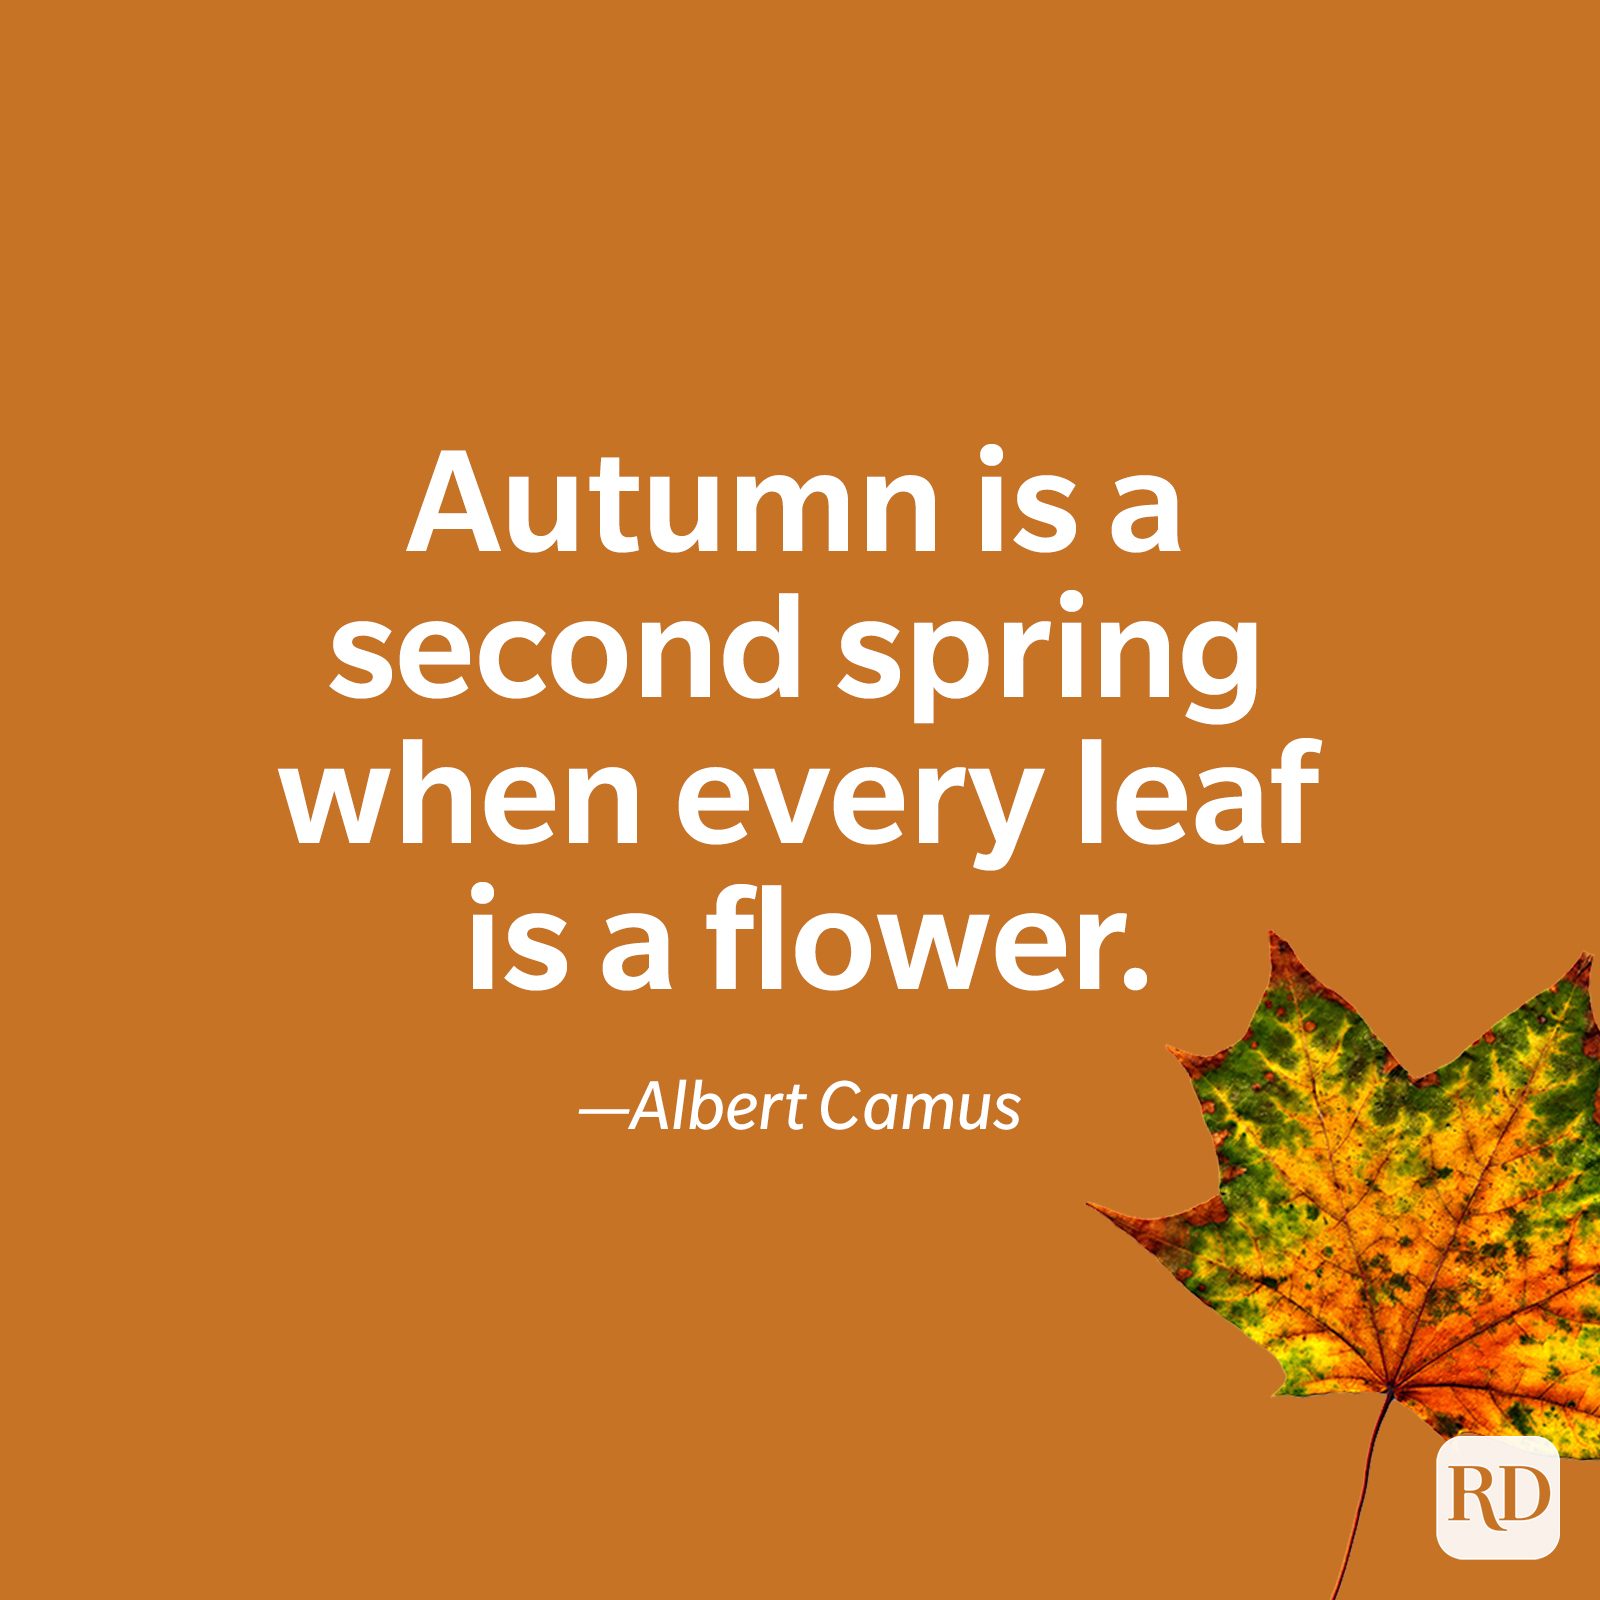 50 Best Fall Quotes You'll Absolutely Love [2021]